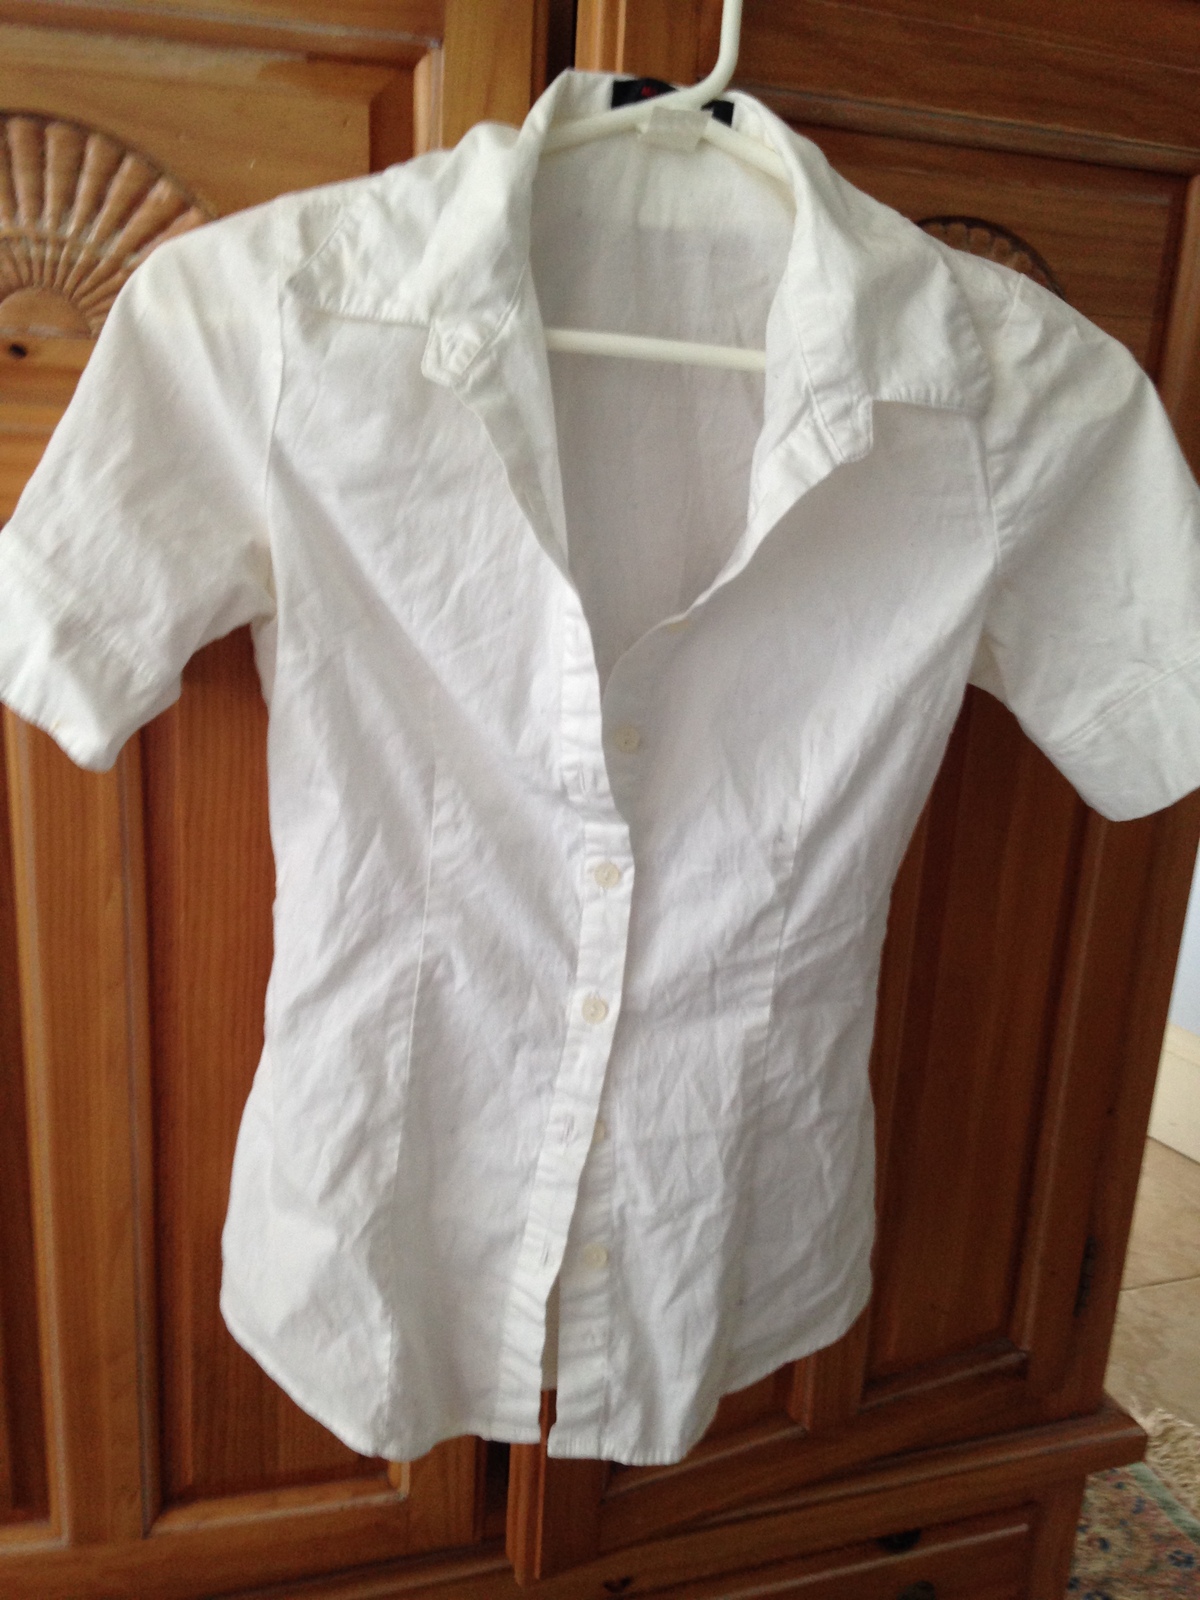 Primary image for Mojo white blouse button front short sleeve juniors size small